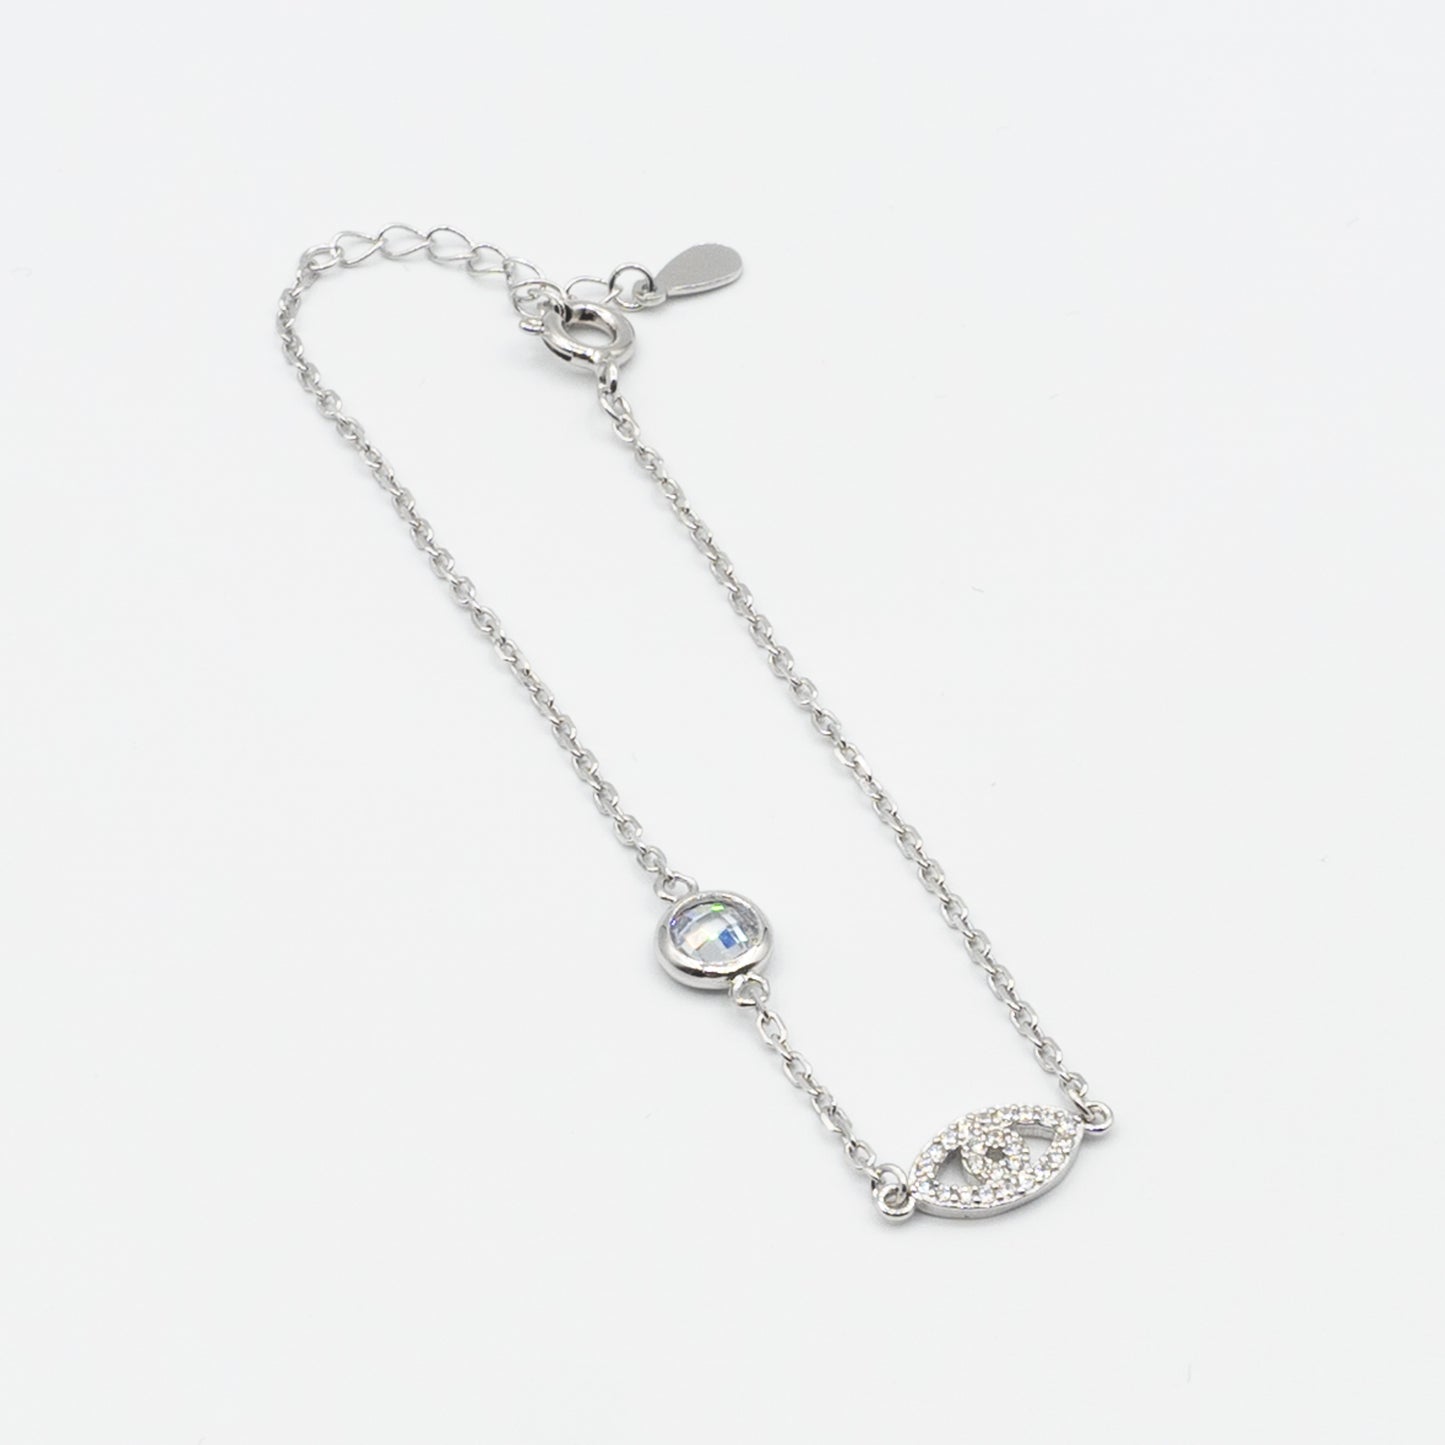 GIANNA- sterling silver bracelet with a protective eye.